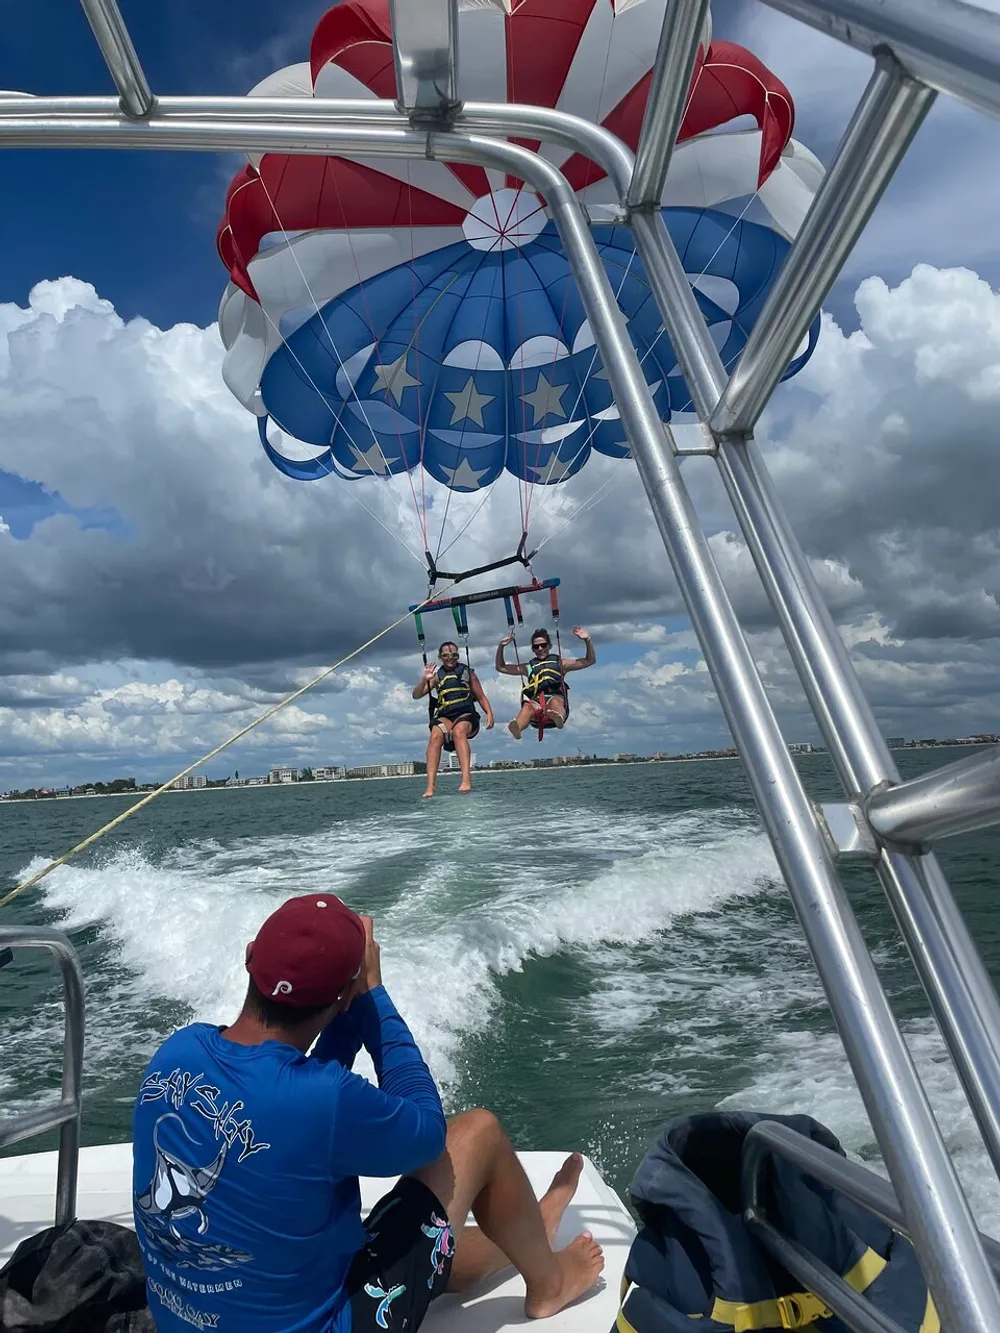 Two people are parasailing over the ocean tethered to a boat where an operator is observing them against a backdrop of clouds and a distant shoreline